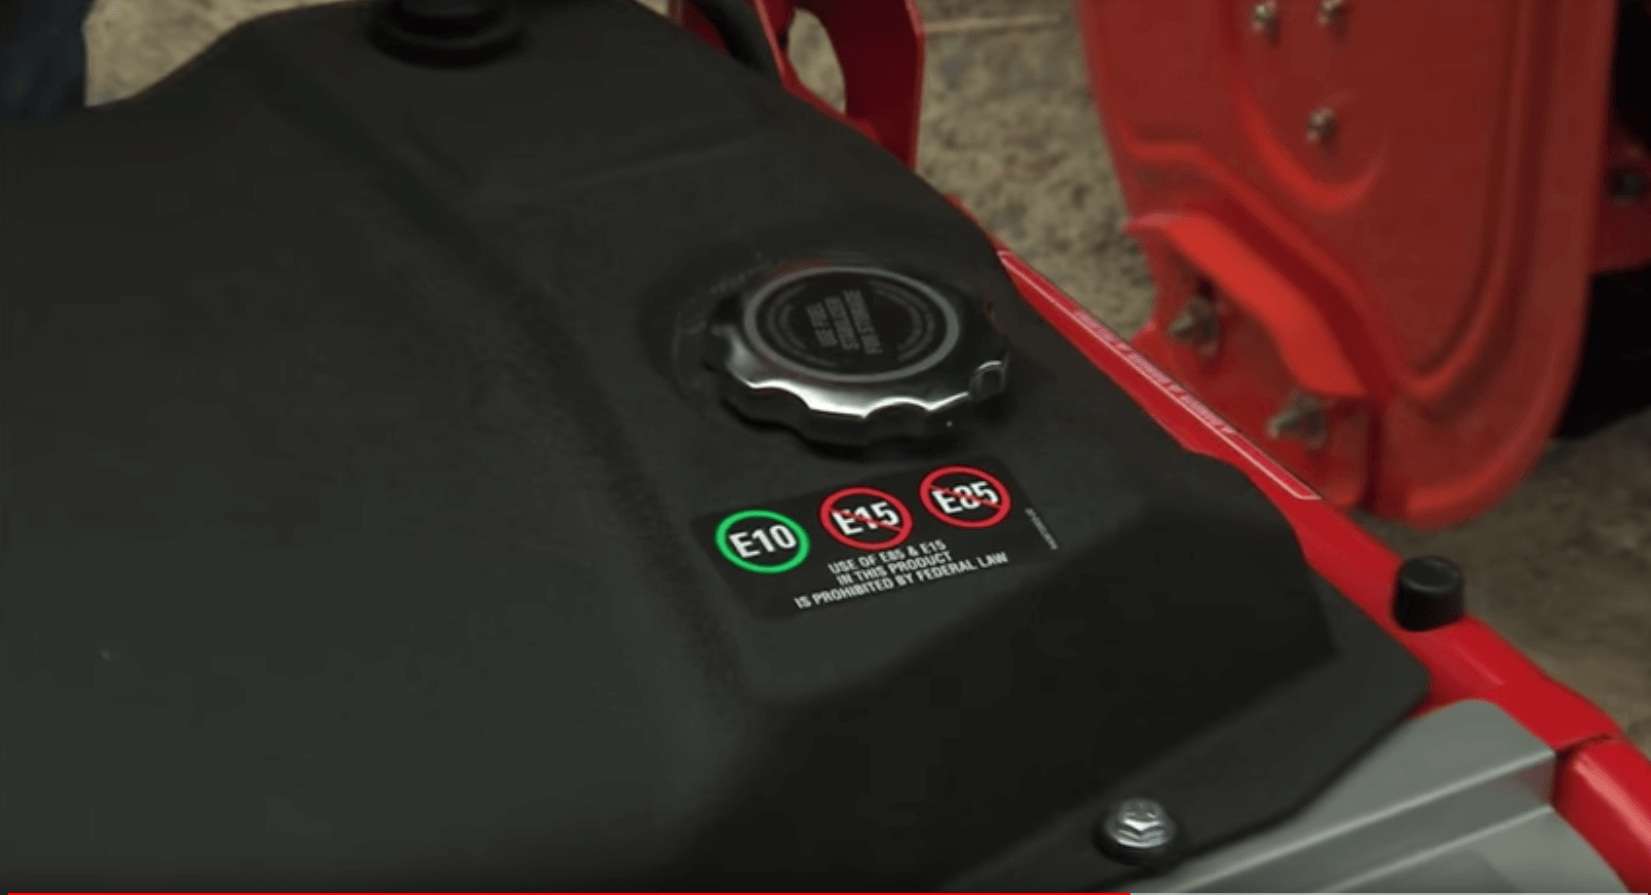 Close up of black fuel tank on lawnmower featuring three types of fuel; E10, E15, E85 with a green circle around E10 and a red circle around E15 and E85 with a warning label stating "Use of E85 & E15 in this product is prohibited by federal law".